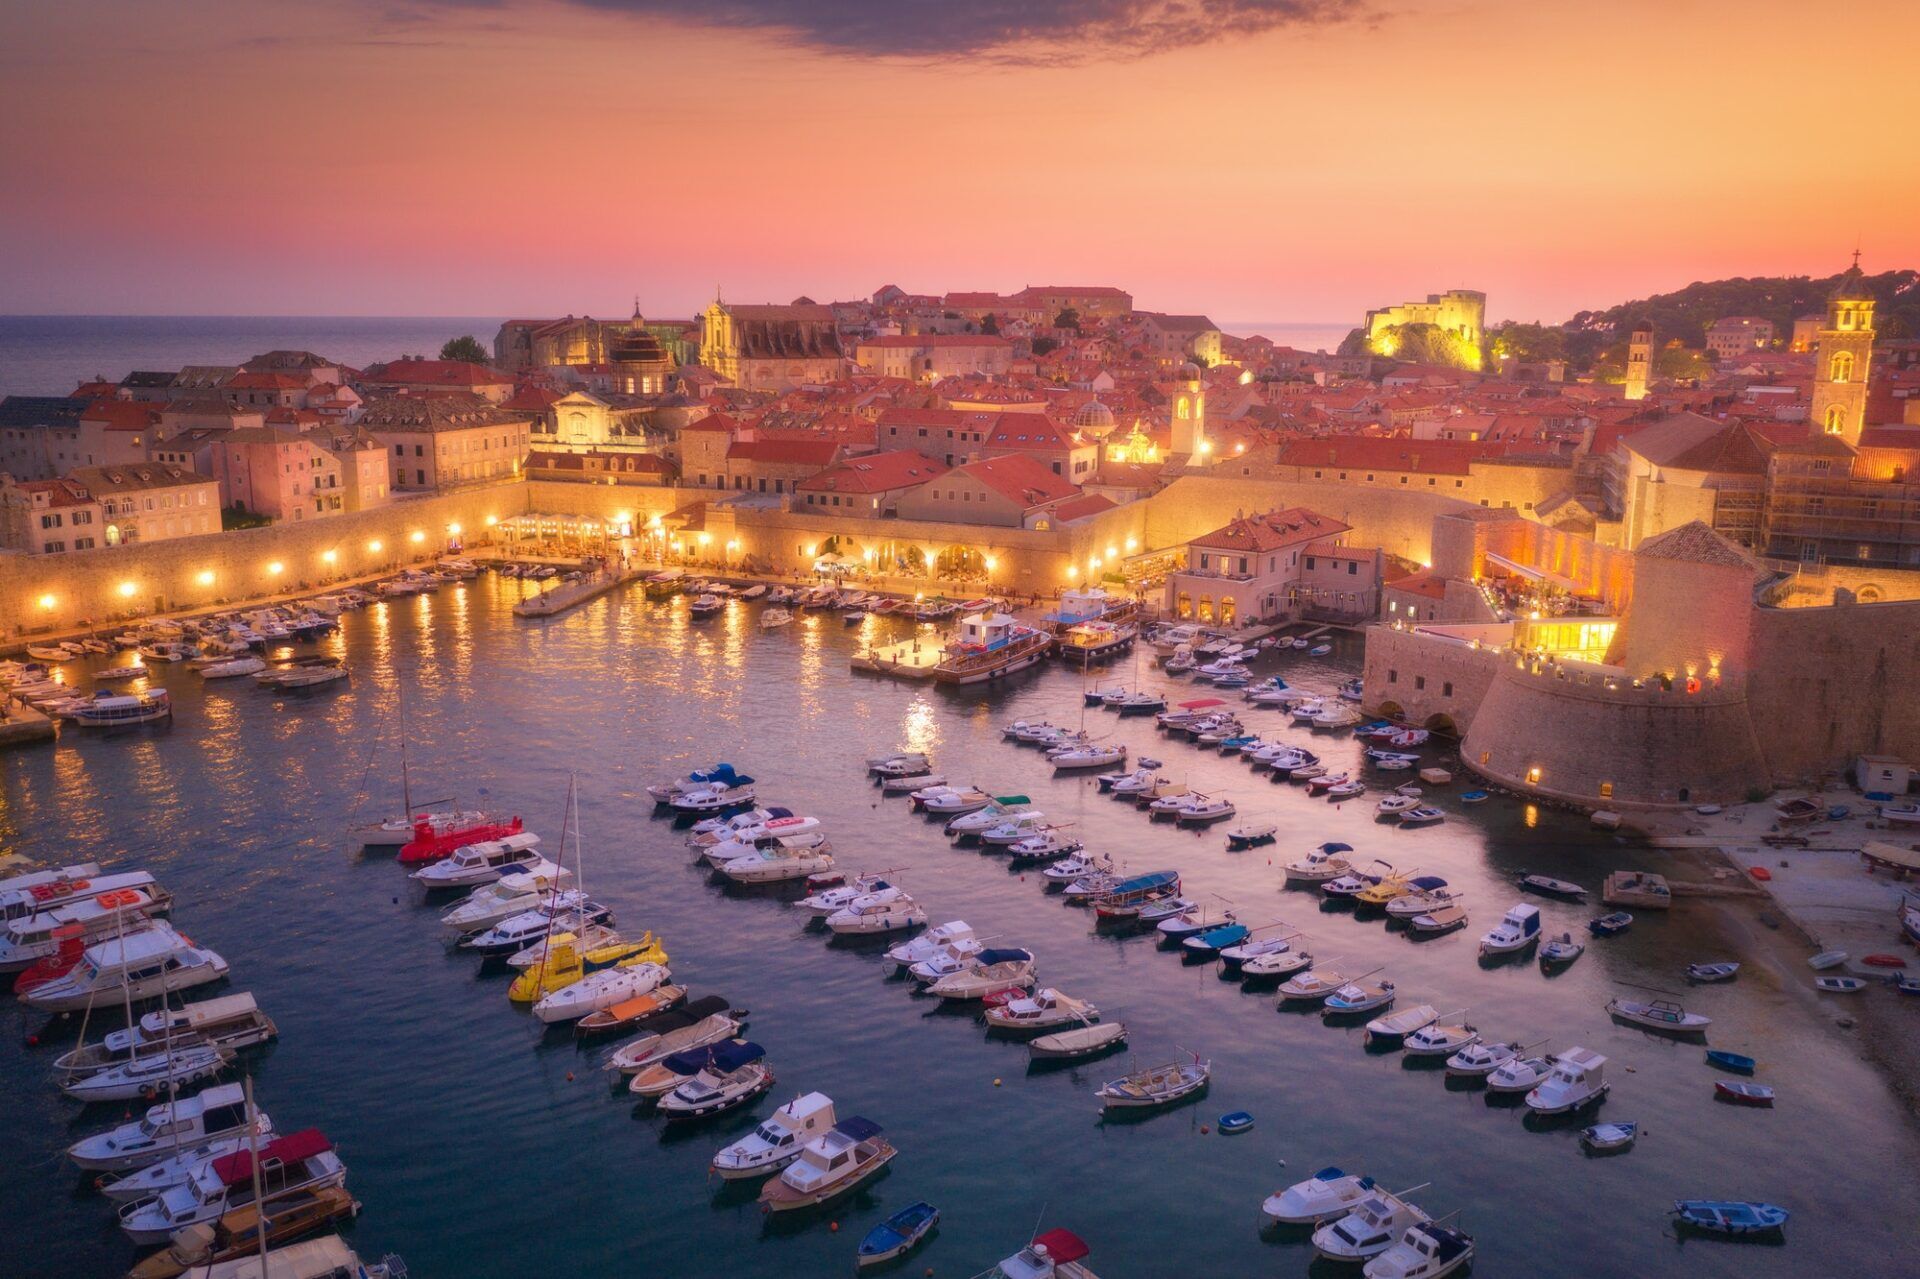 Aerial view of houses with red roofs at night in Dubrovnik